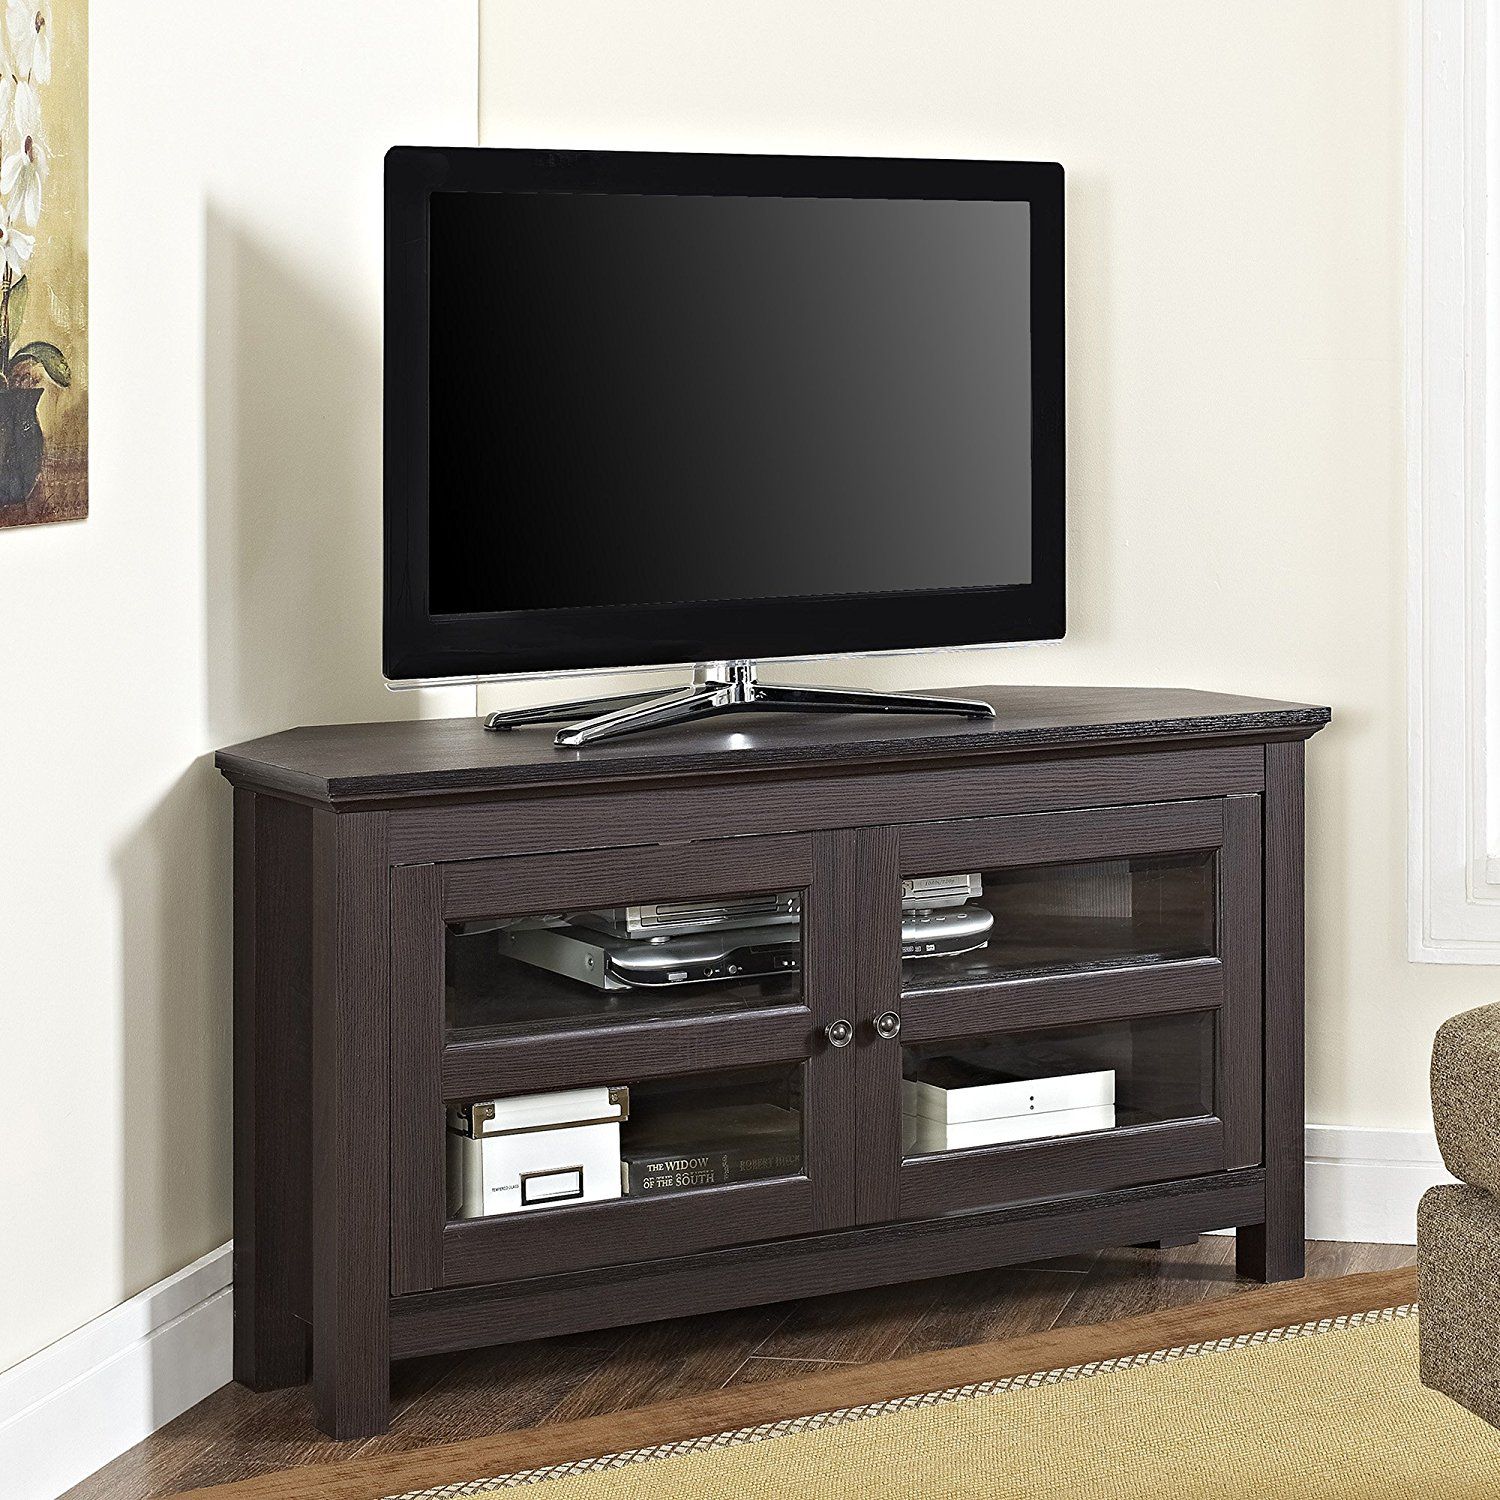 Top 10 Best Modern Tall Corner Tv Stands In 2021 Reviews Pertaining To Priya Corner Tv Stands (Photo 4 of 15)